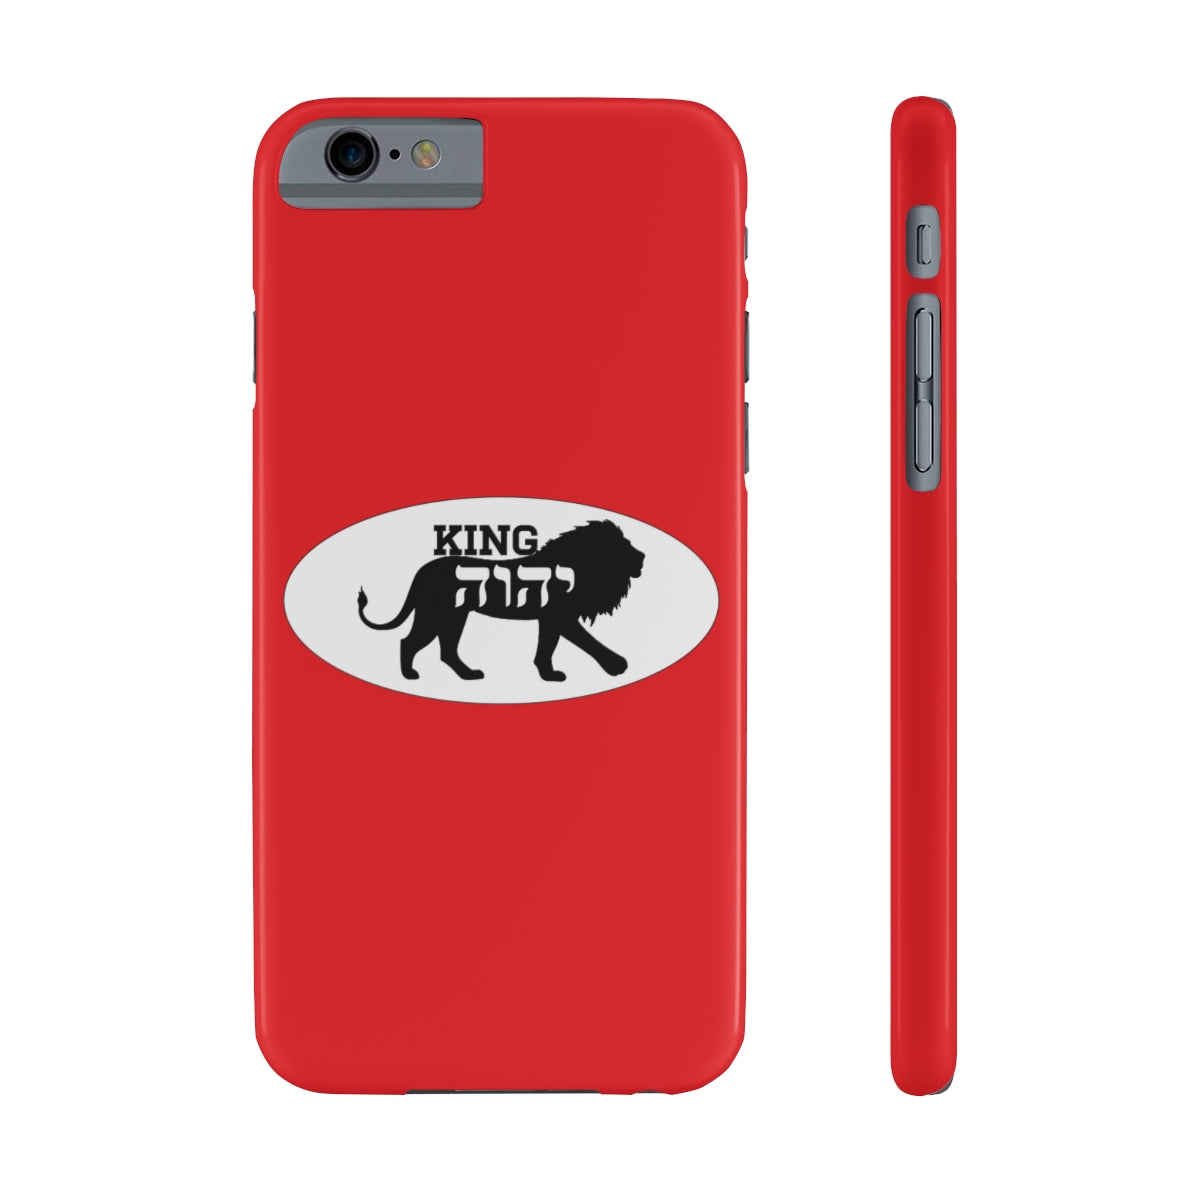 King YAHWEH Trends Slim Phone Case (Fire Red)